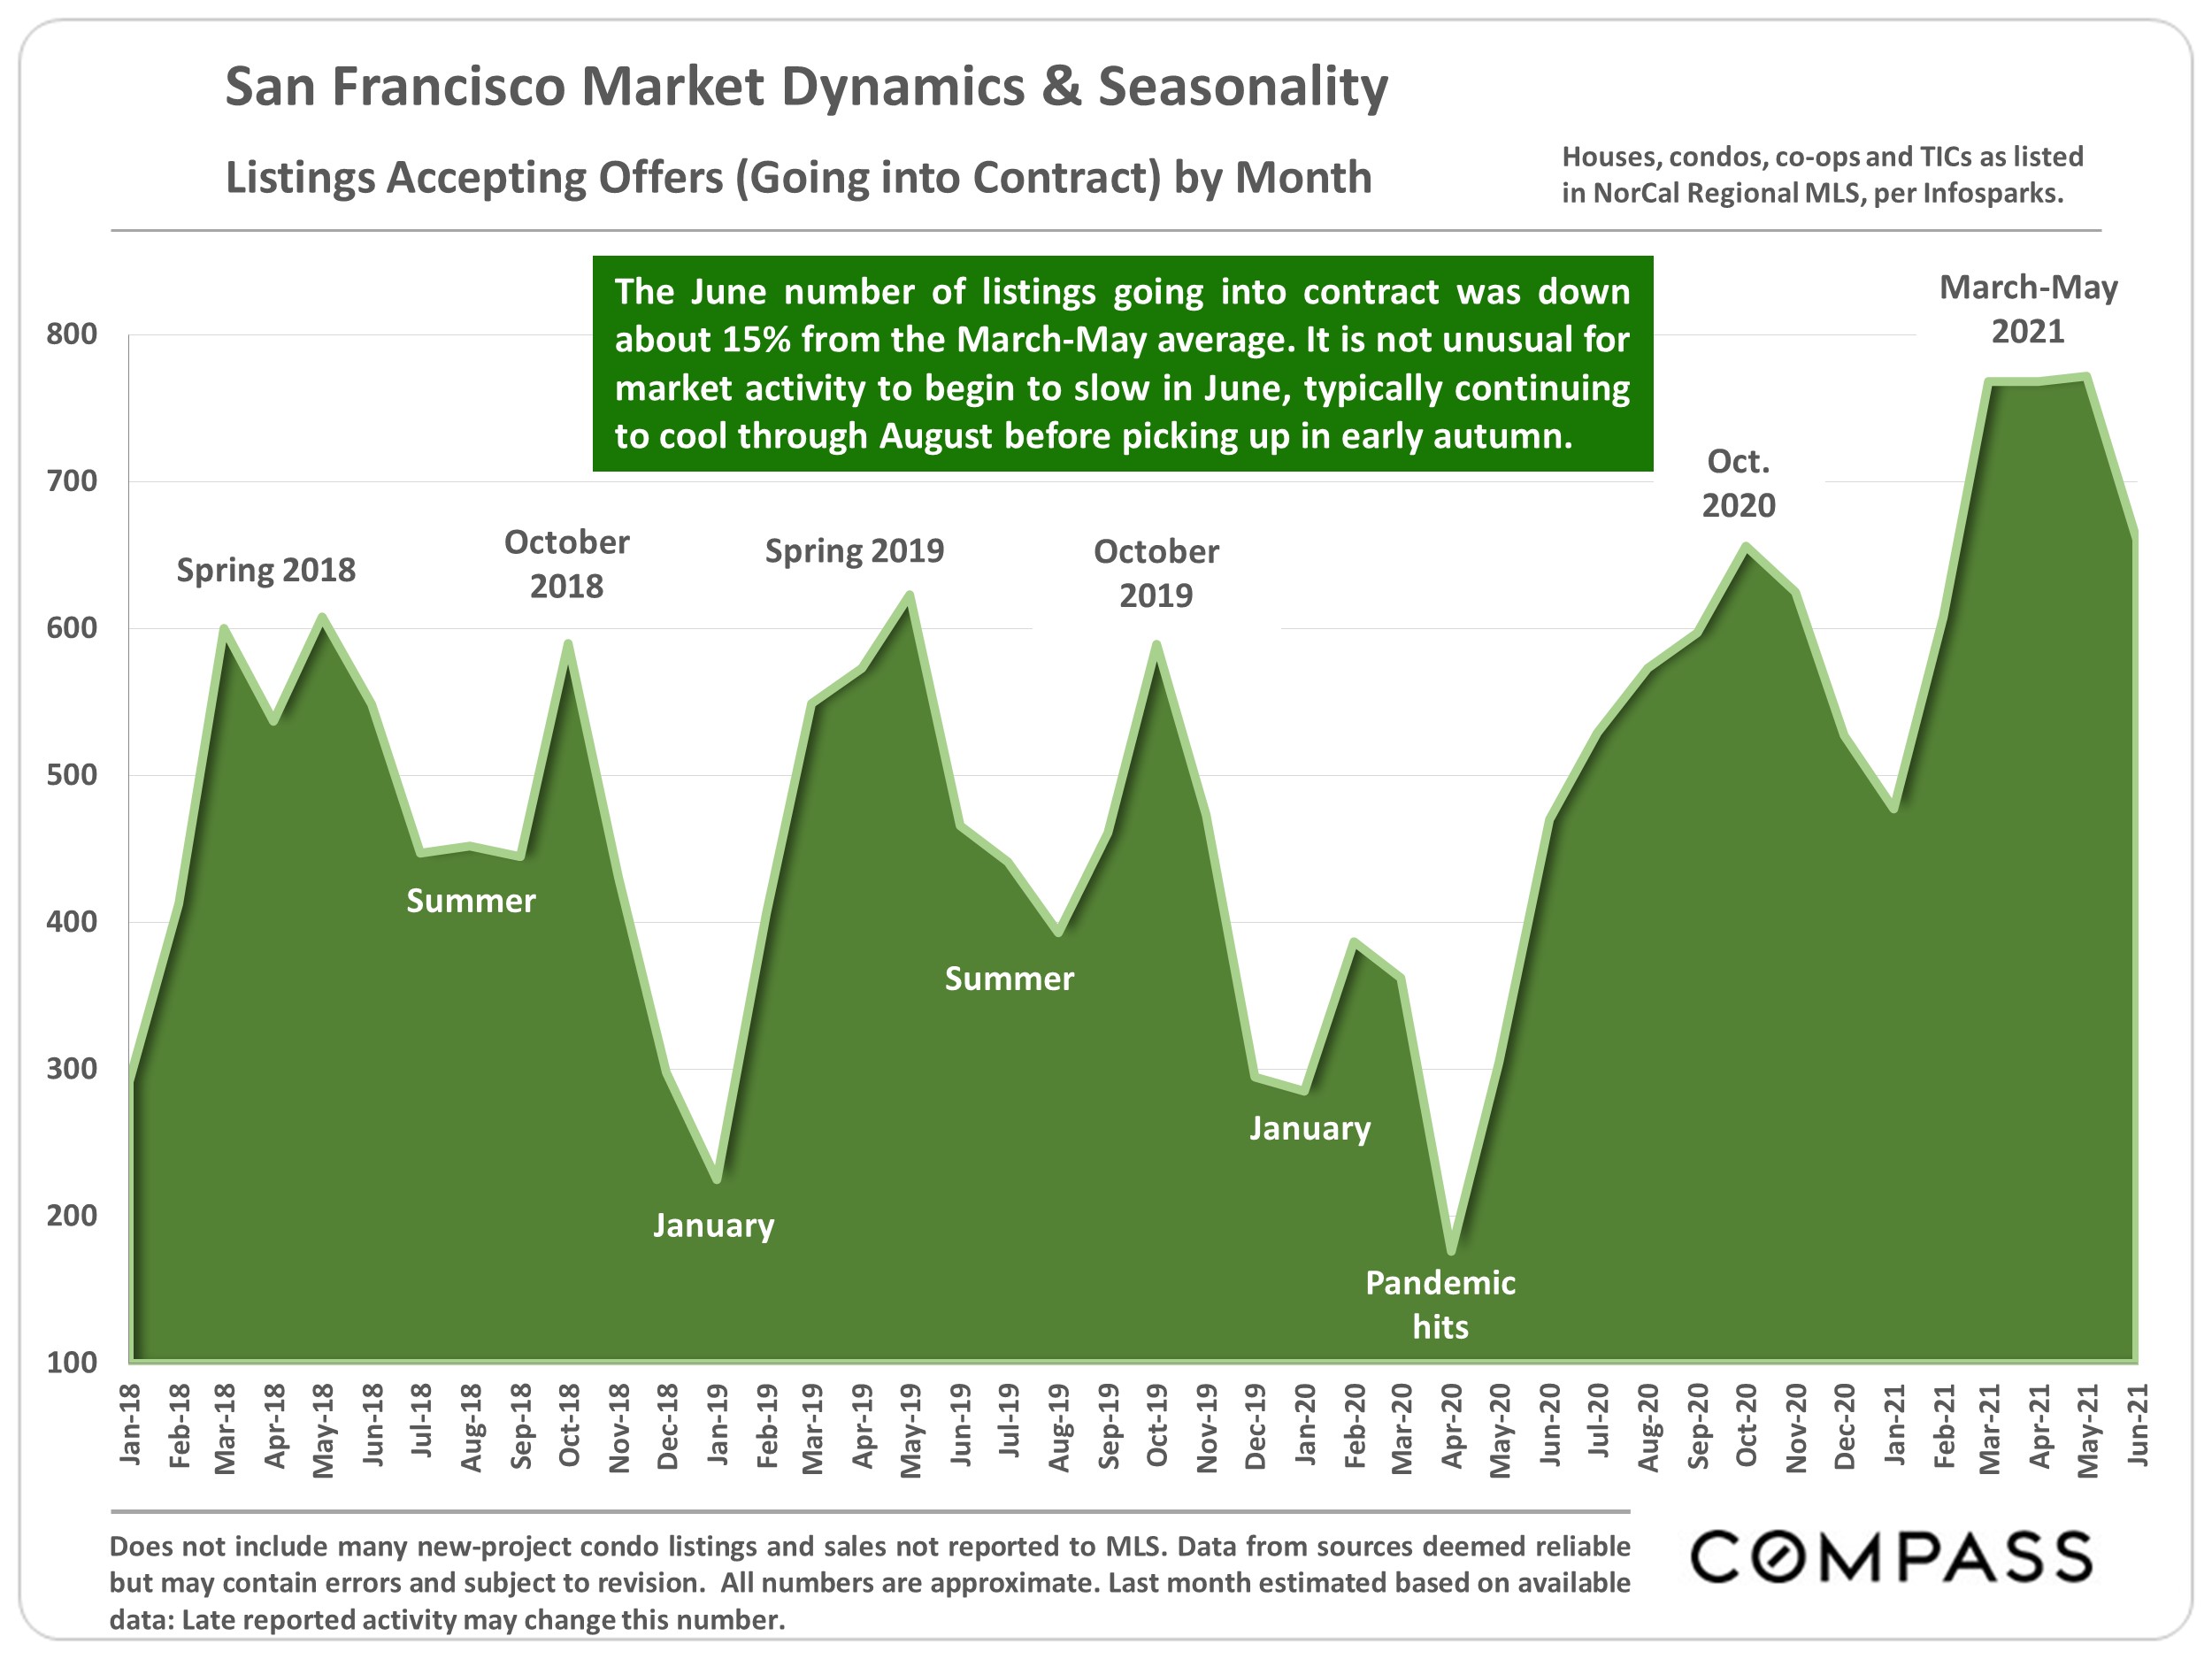 Graph of Listing accepting Offers by month, houses/condos/co-ops/TICs, from Jan 2018 - Jun 2021, San Francisco Market Dynamics and Seasonability